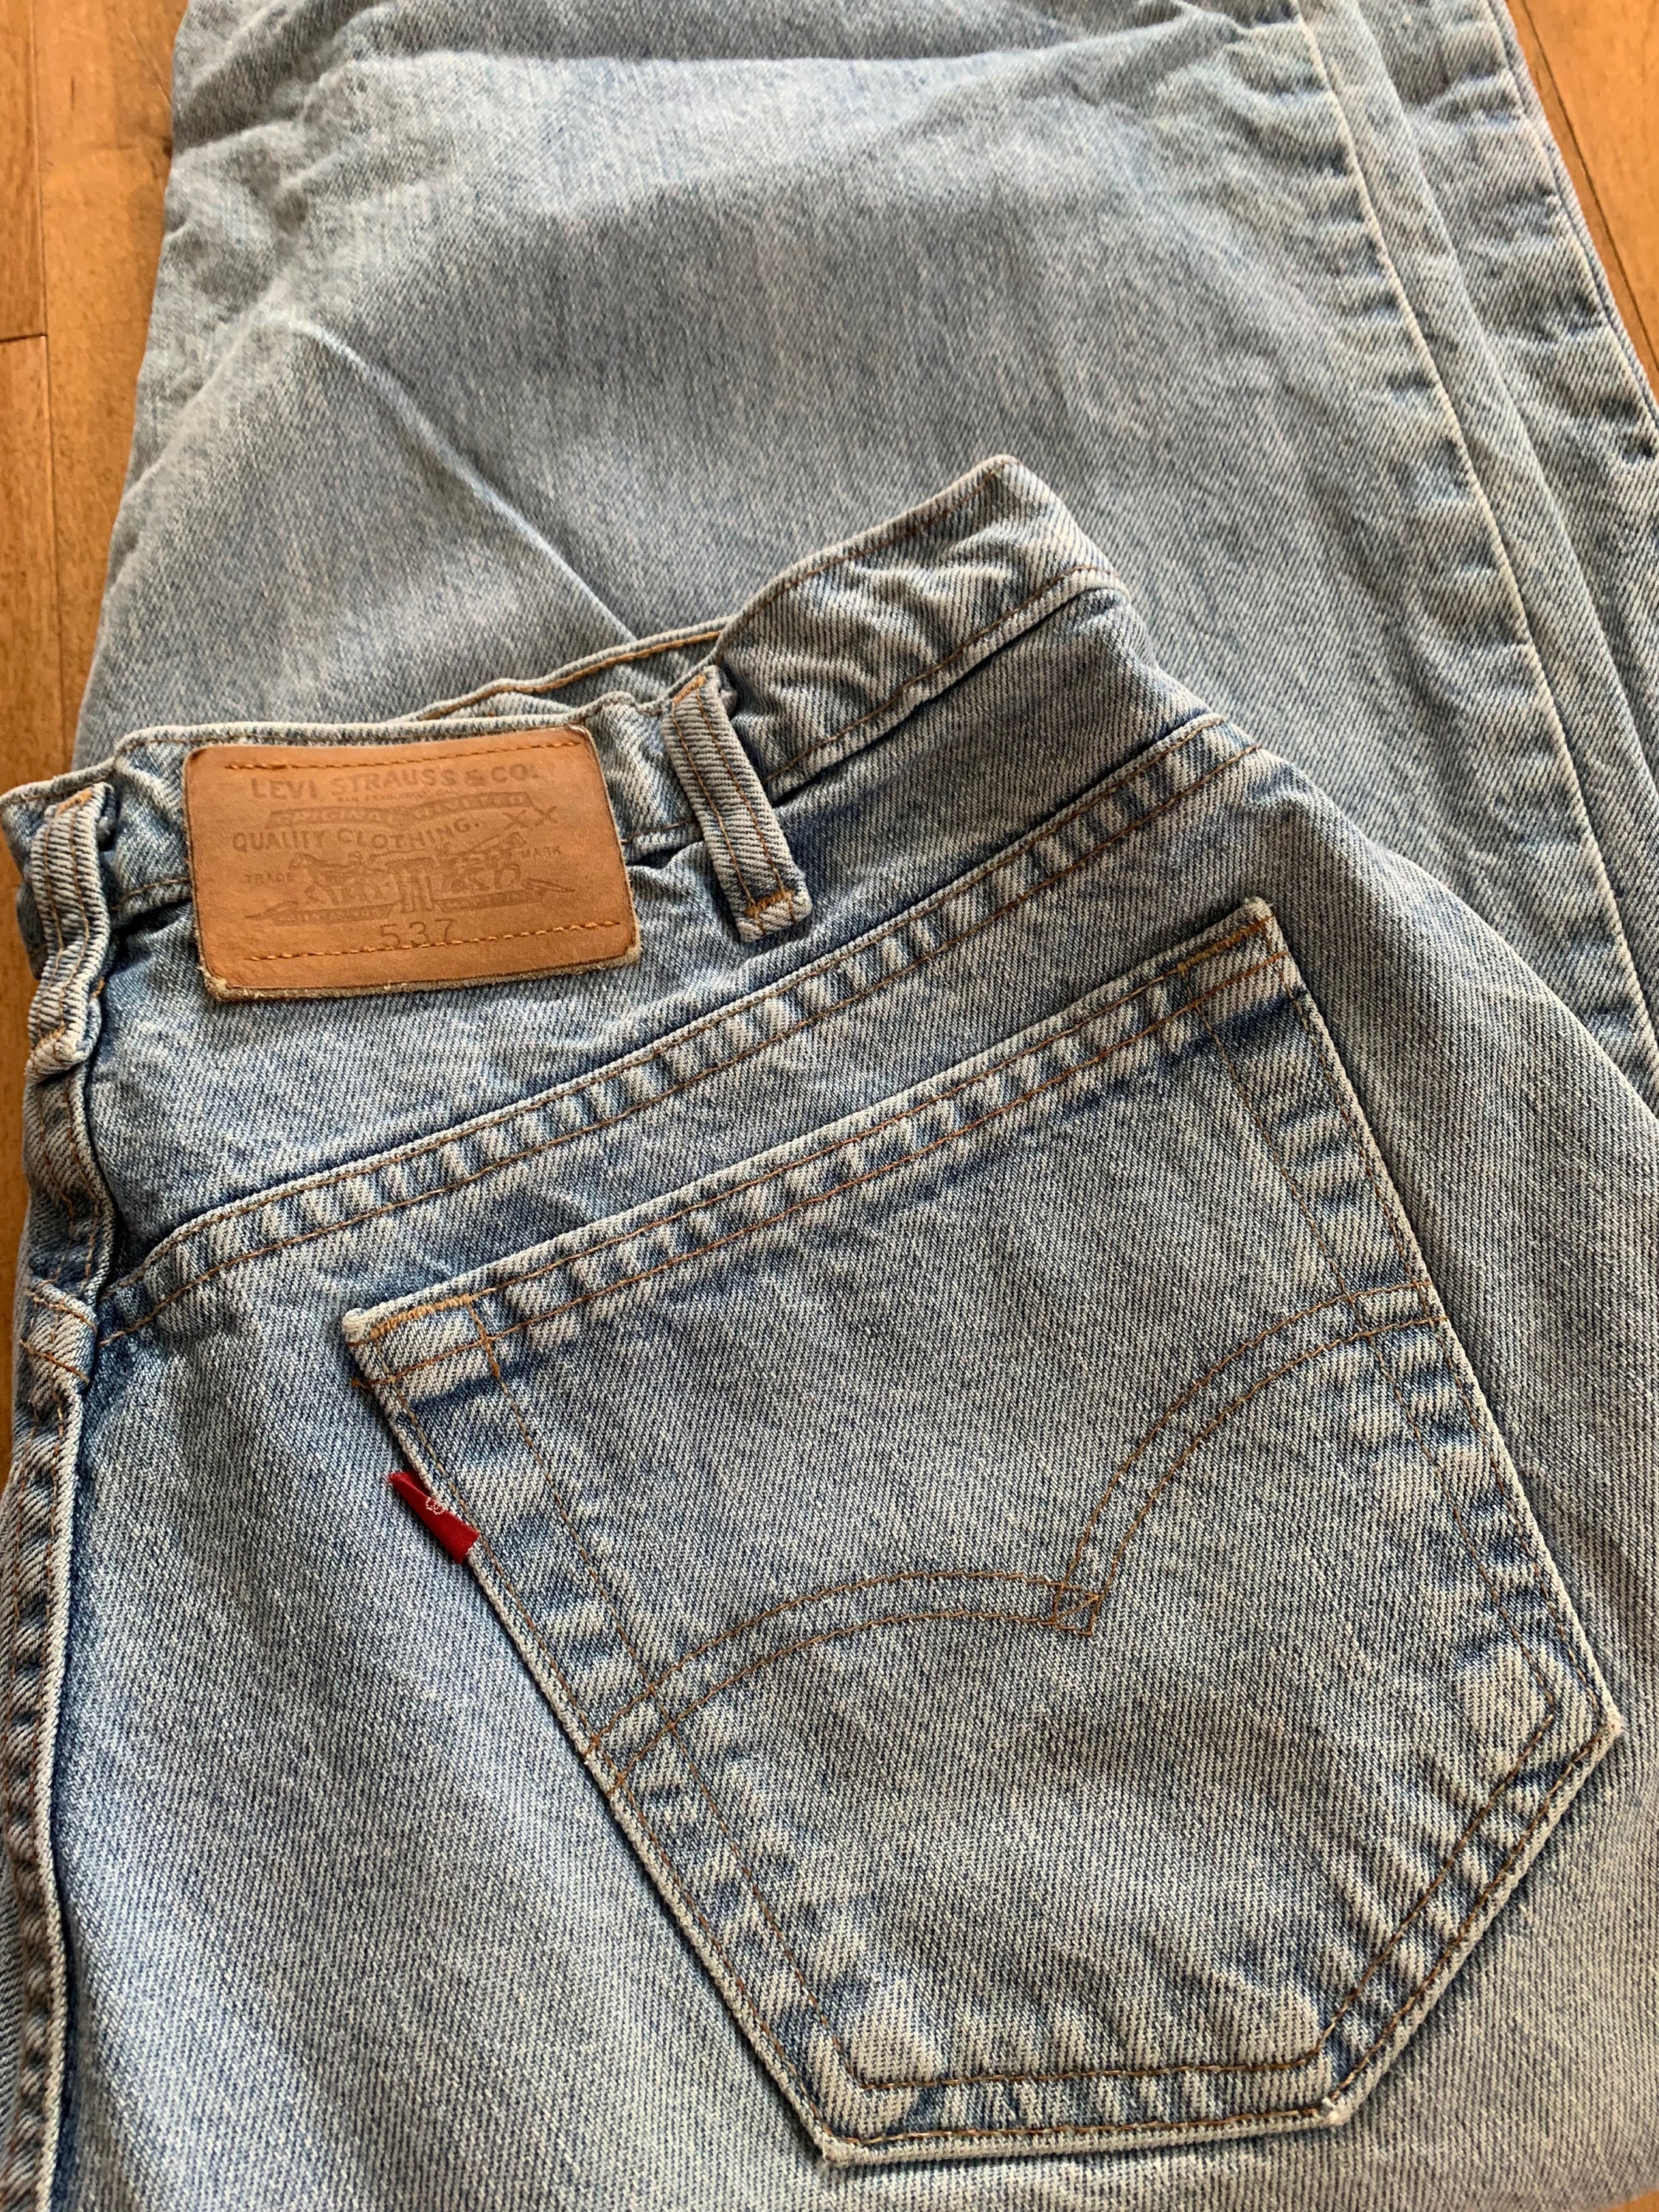 1990s Levis 537 Light Blue Jeans Made in Canada 100% -